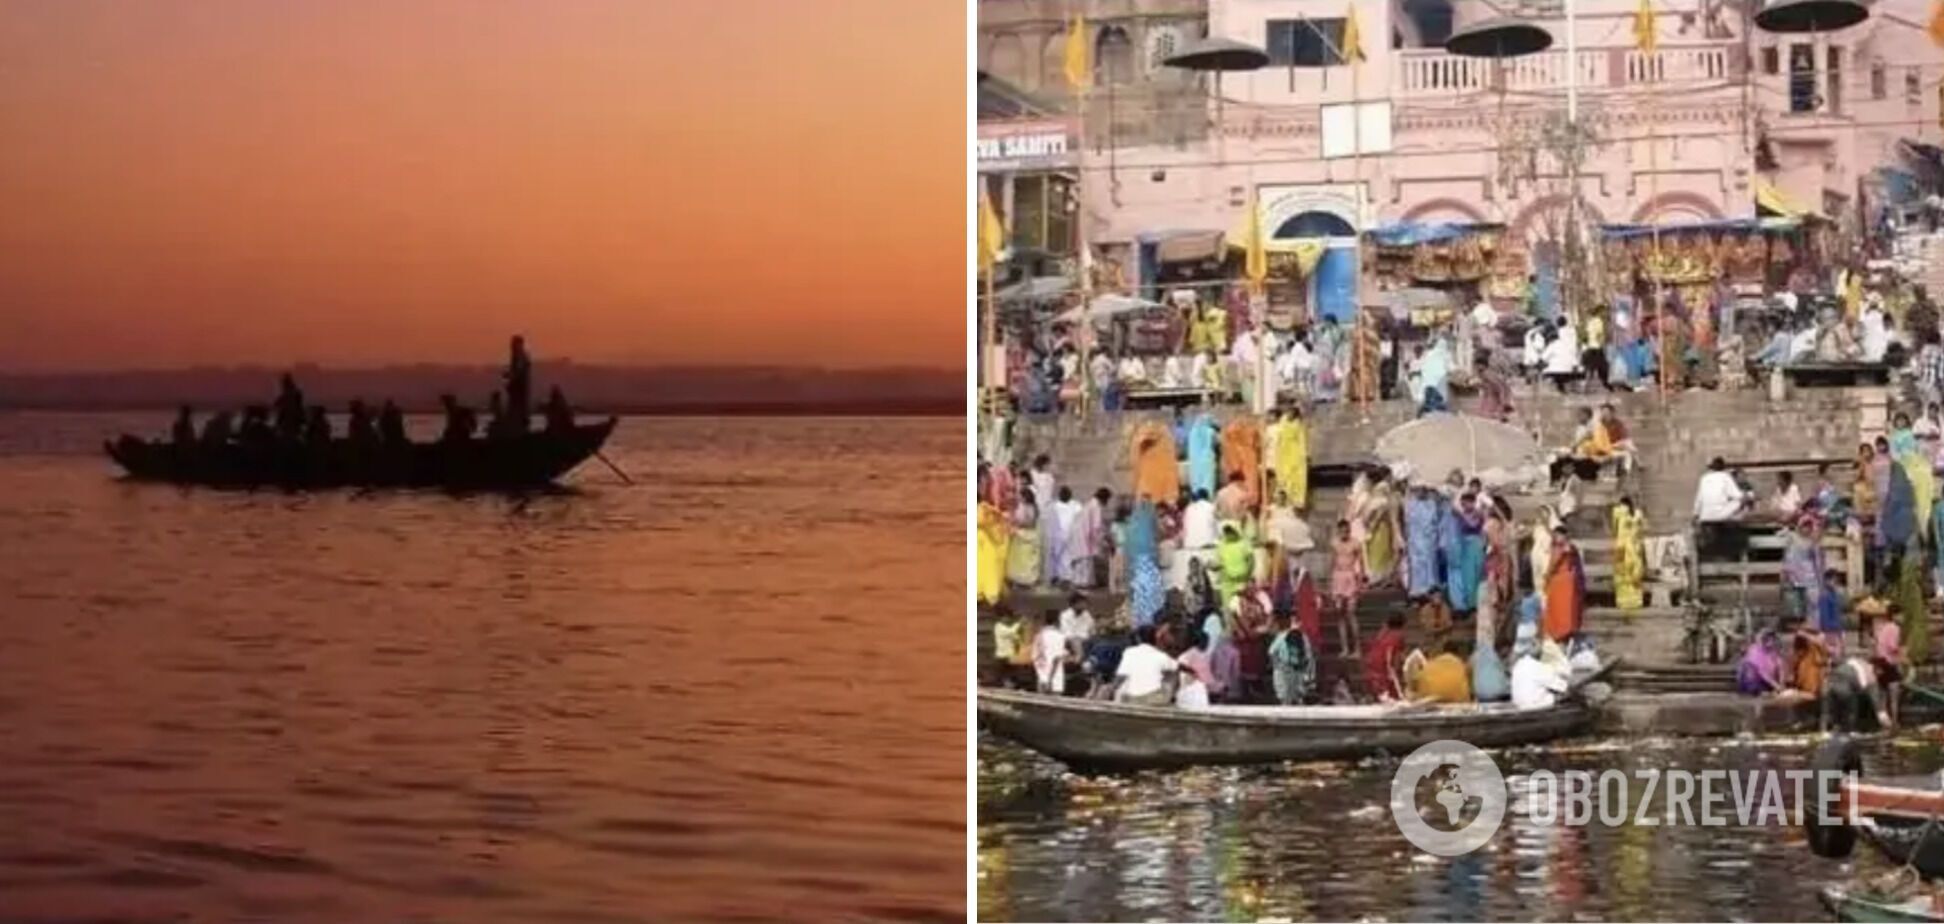 The Ganges River is crowded with tourists